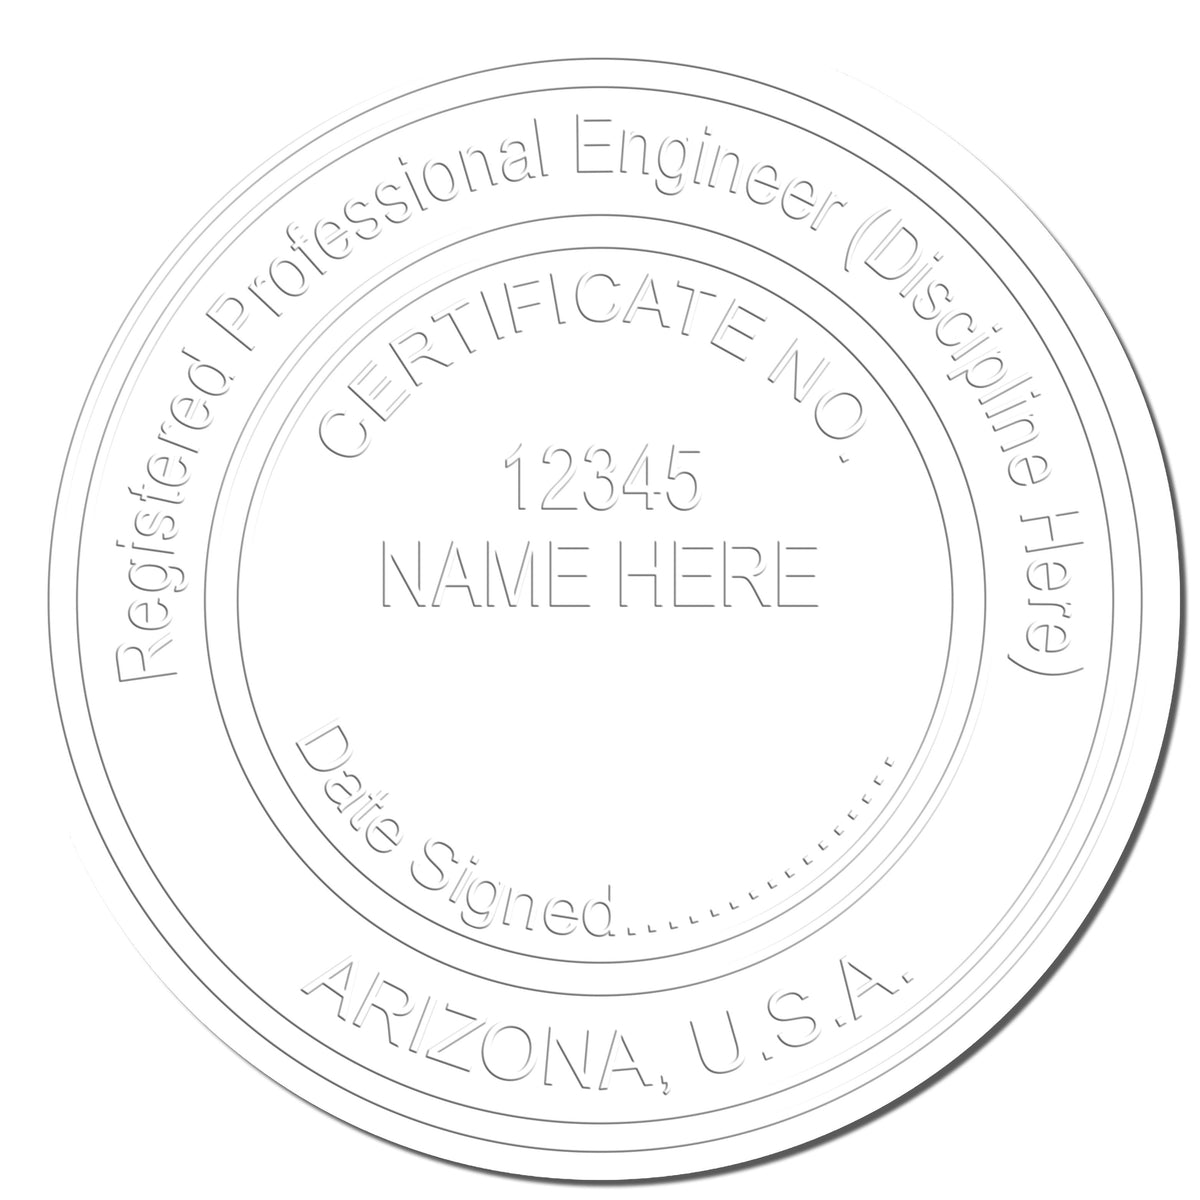 The Soft Arizona Professional Engineer Seal stamp impression comes to life with a crisp, detailed photo on paper - showcasing true professional quality.